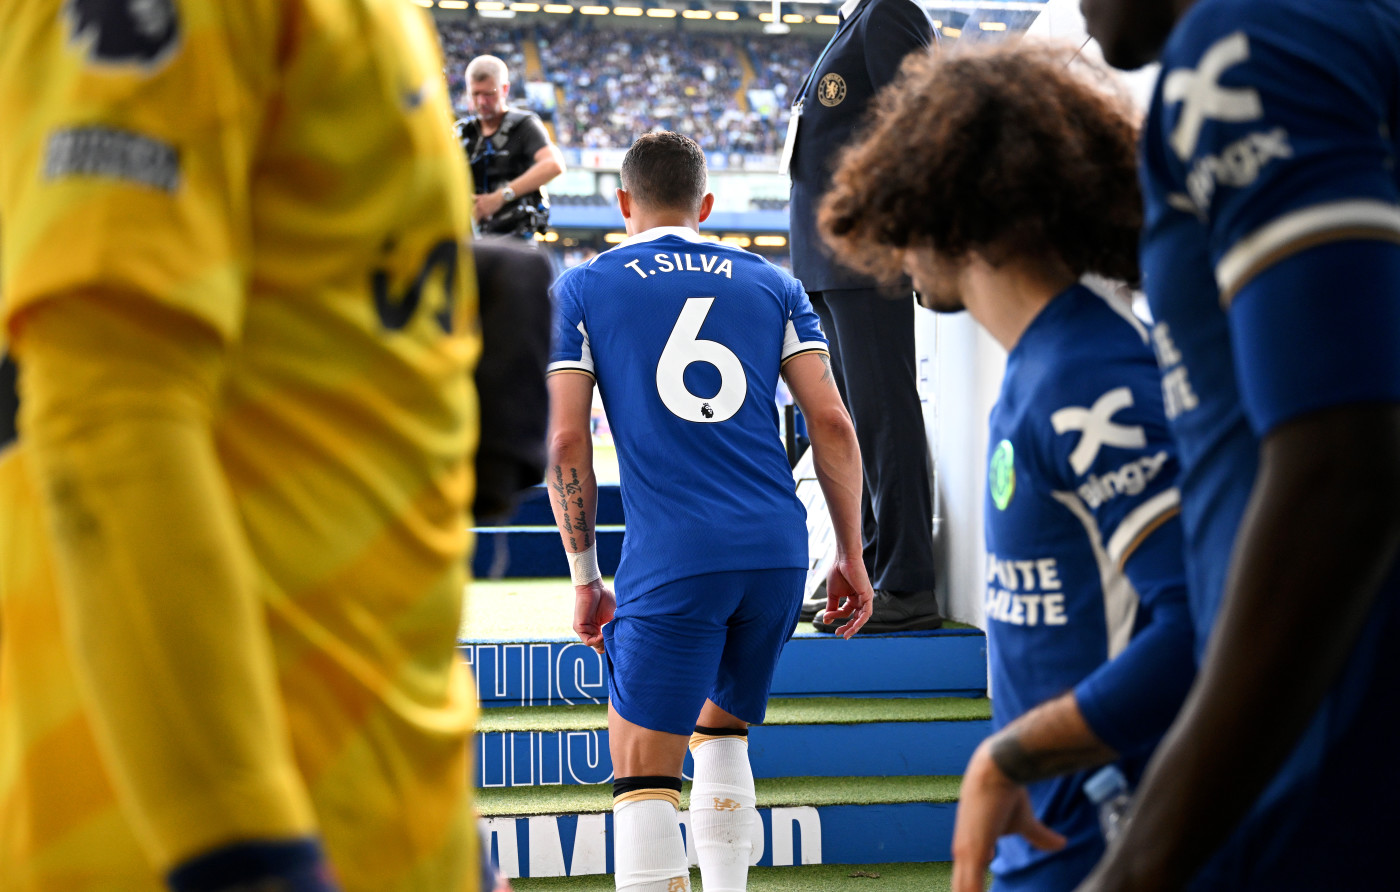 Thiago Silva walking out at Stamford Bridge as a Chelsea player for the last time